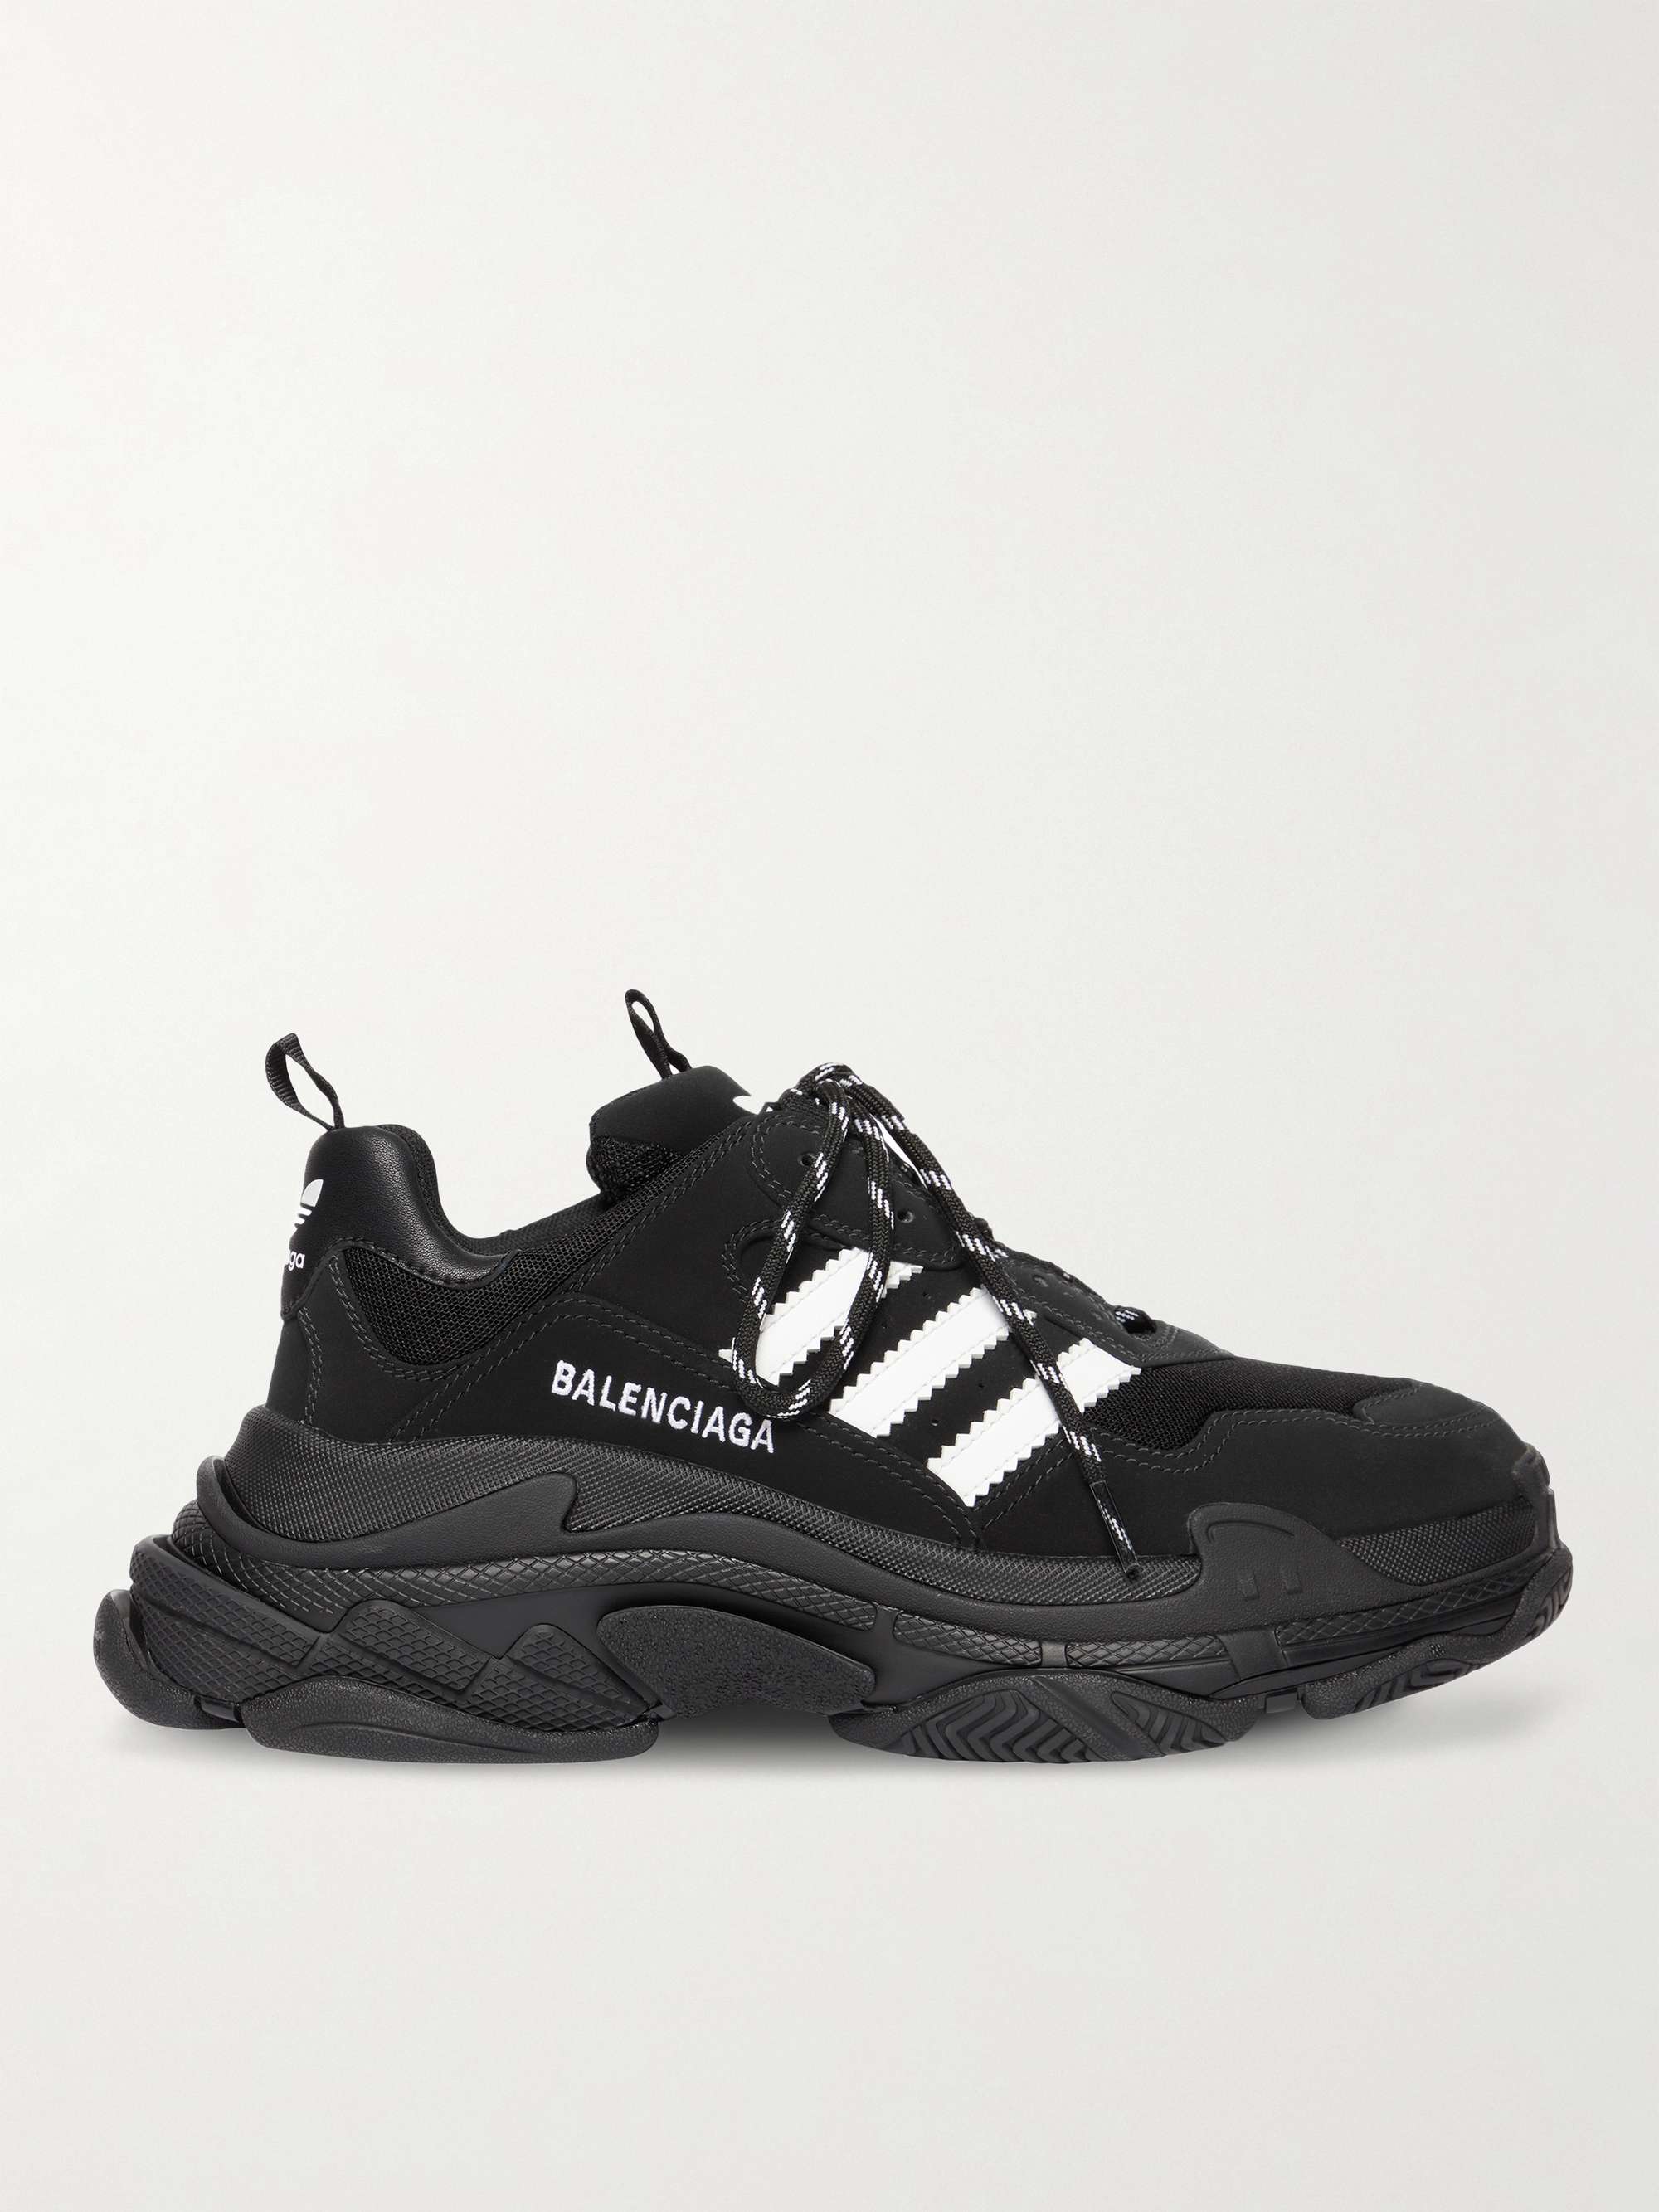 BALENCIAGA + adidas Triple S Leather-Trimmed Nubuck and Mesh Sneakers